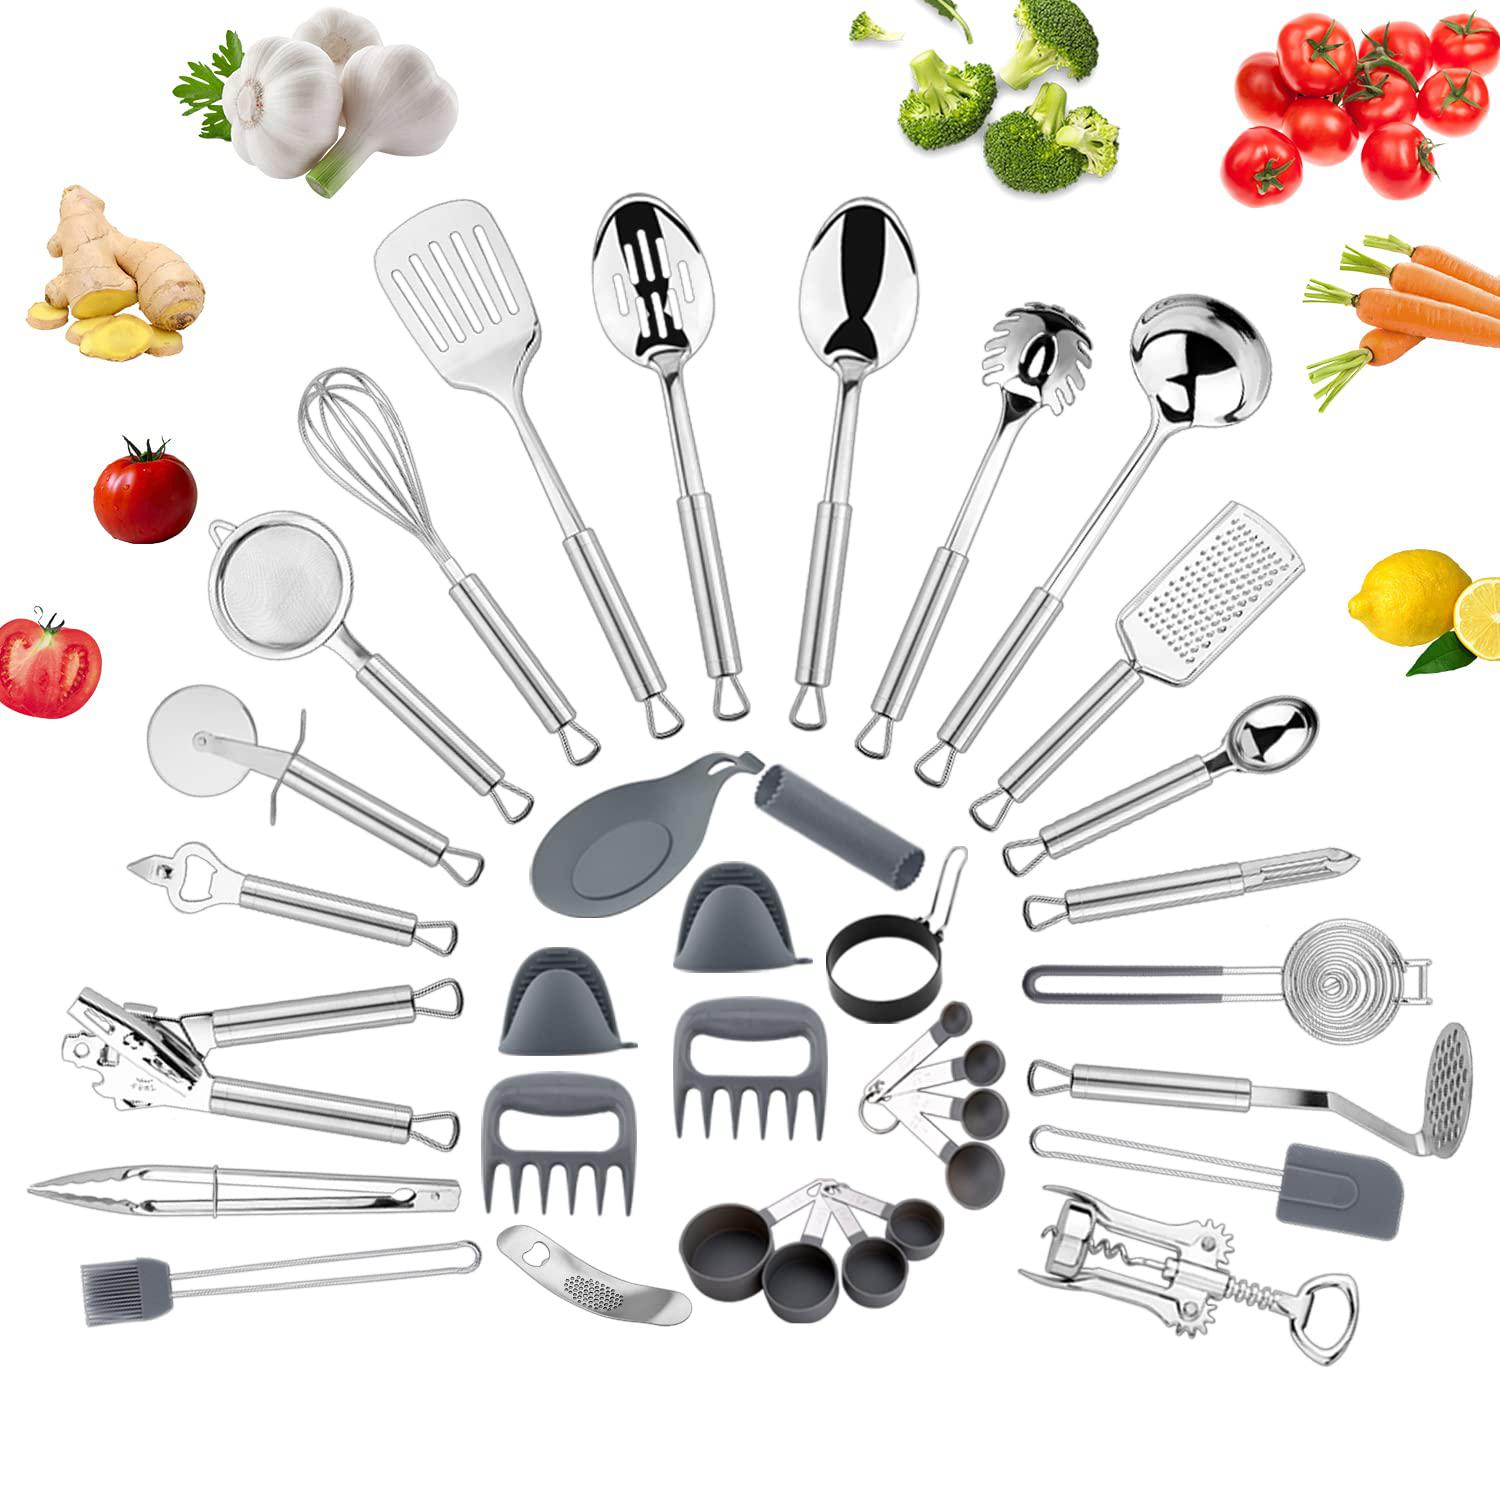 everbirght 35 pcs kitchen utensils set, stainless steel cooking utensils set  with tongs, spatula, spoon brush non-stick & hea